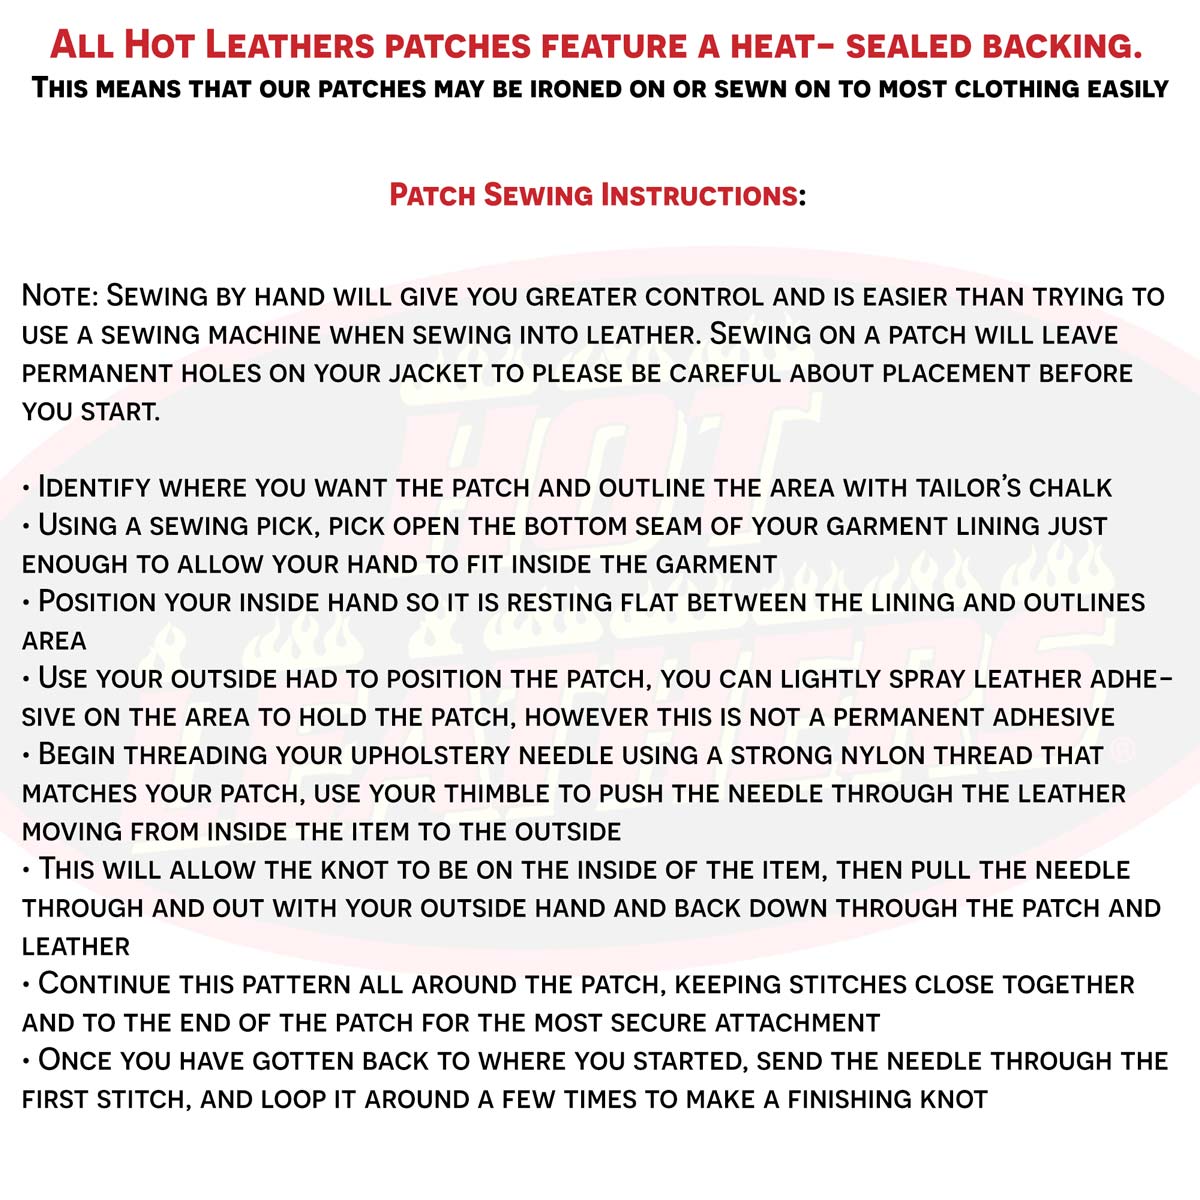 Hot Leathers Forever Free 12" X 3" Top Rocker Patch PPM4189